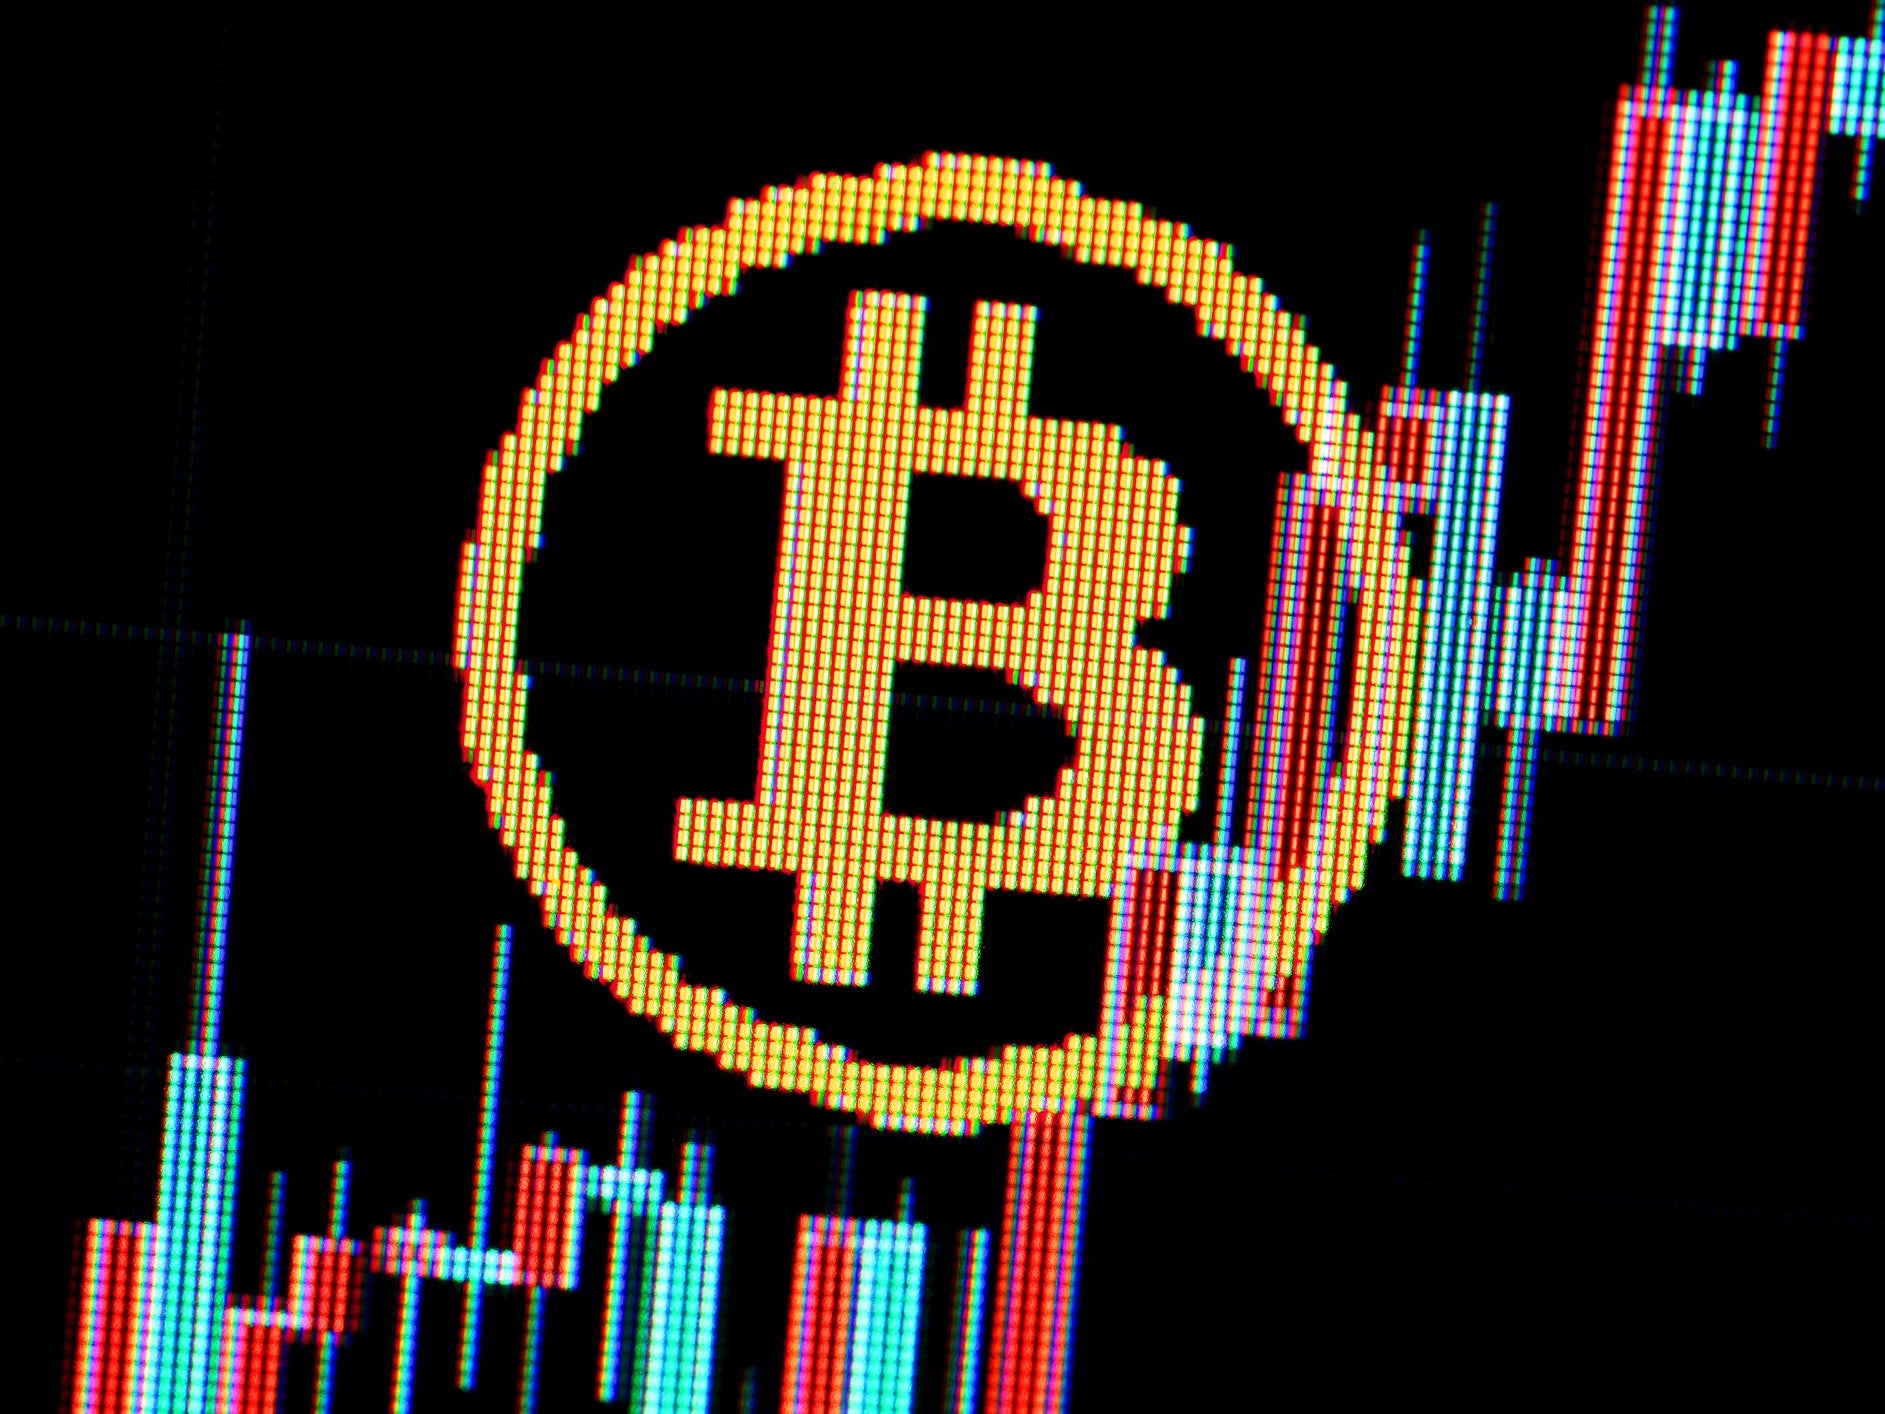 Bitcoin has been unusually volatile in 2021, with price analysts divided over whether it is in a bull or bear market in June